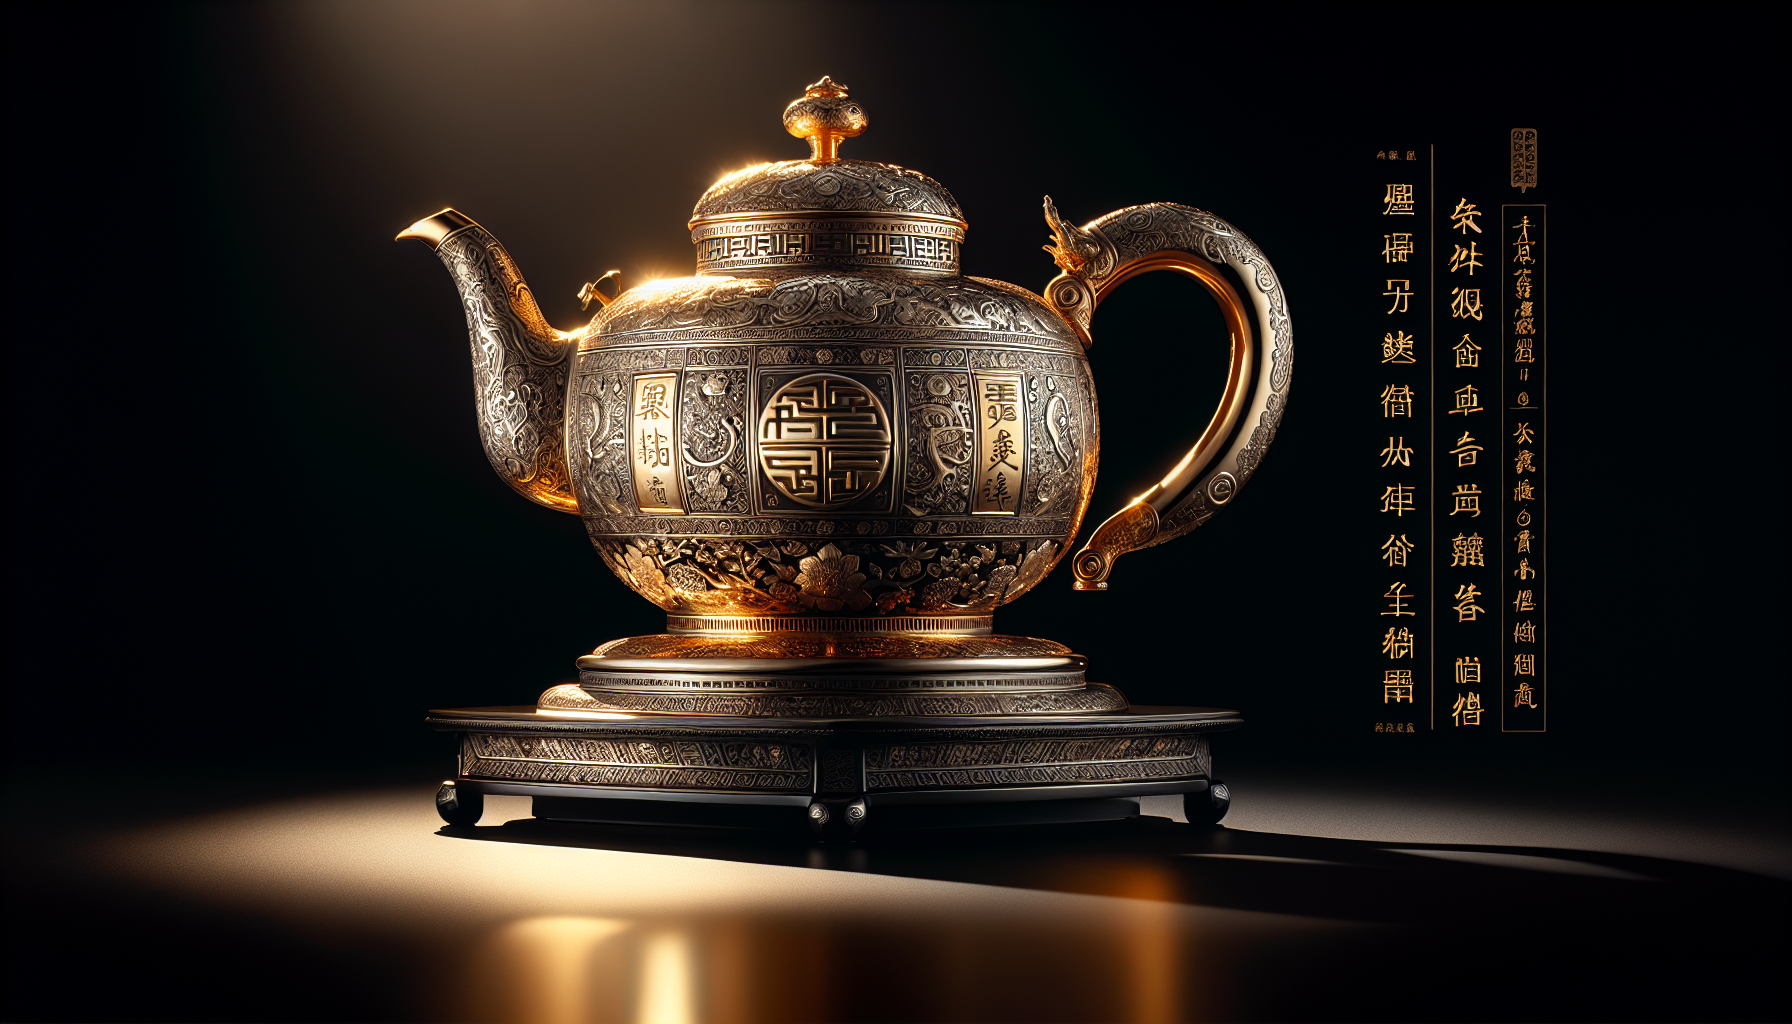 What Is The Most Valuable Teapot?